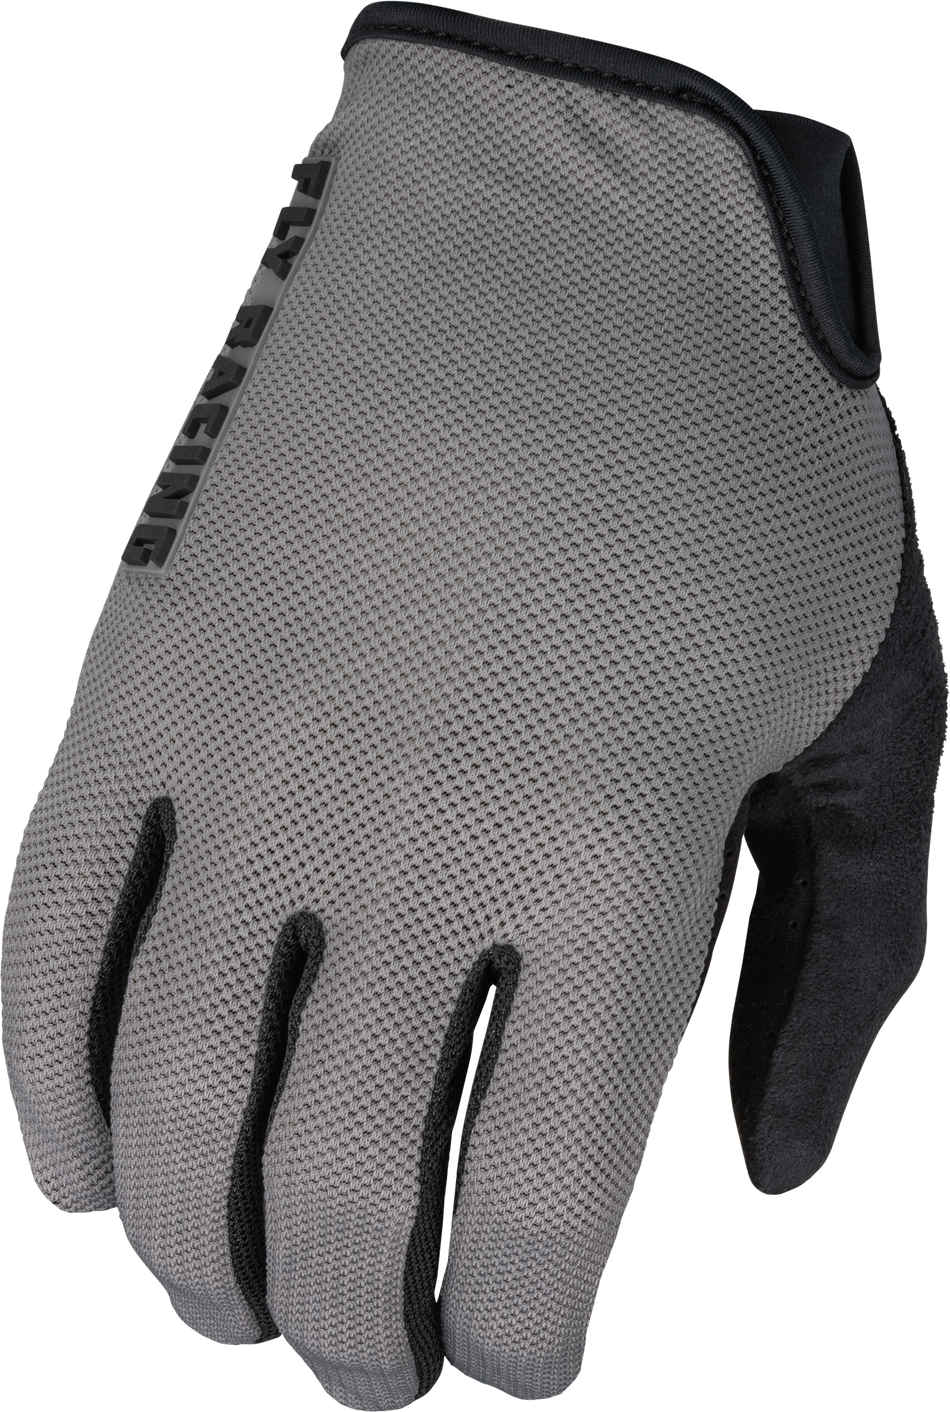 FLY RACING Mesh Gloves Grey Sm 375-306S